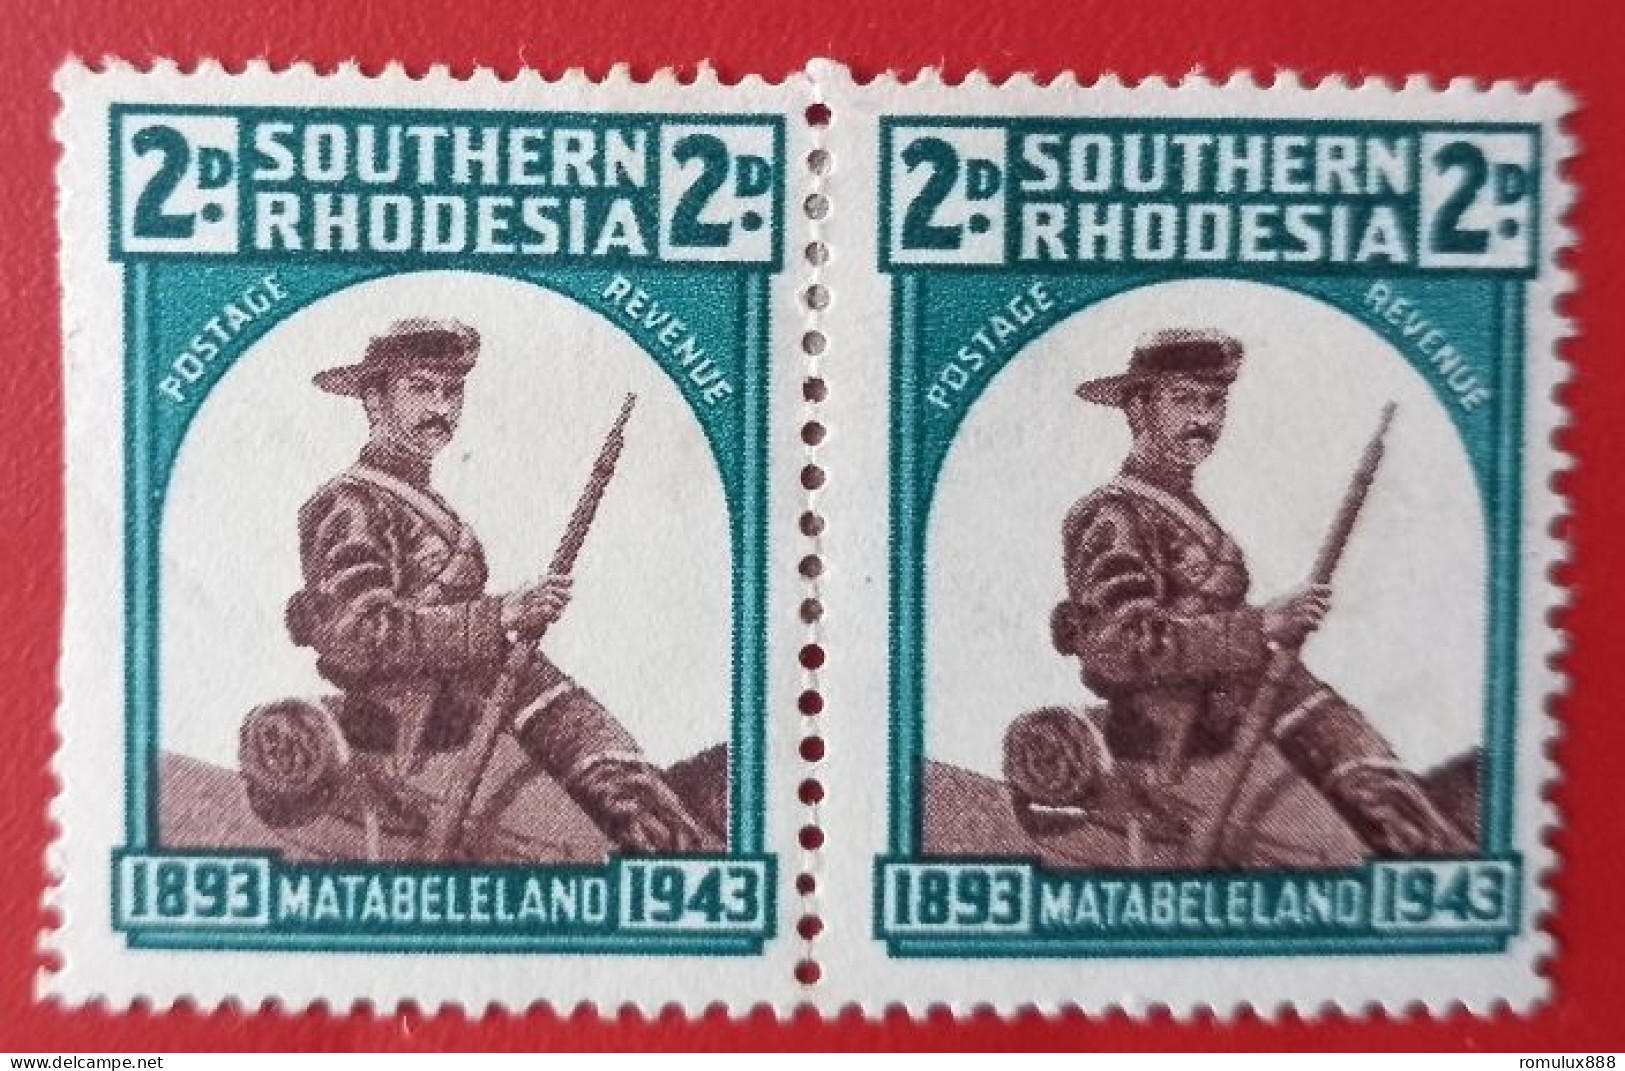 SOUTHERN RHODESIA SACC 2D WITH SADDEBAG FLAW MH - Rodesia Del Sur (...-1964)